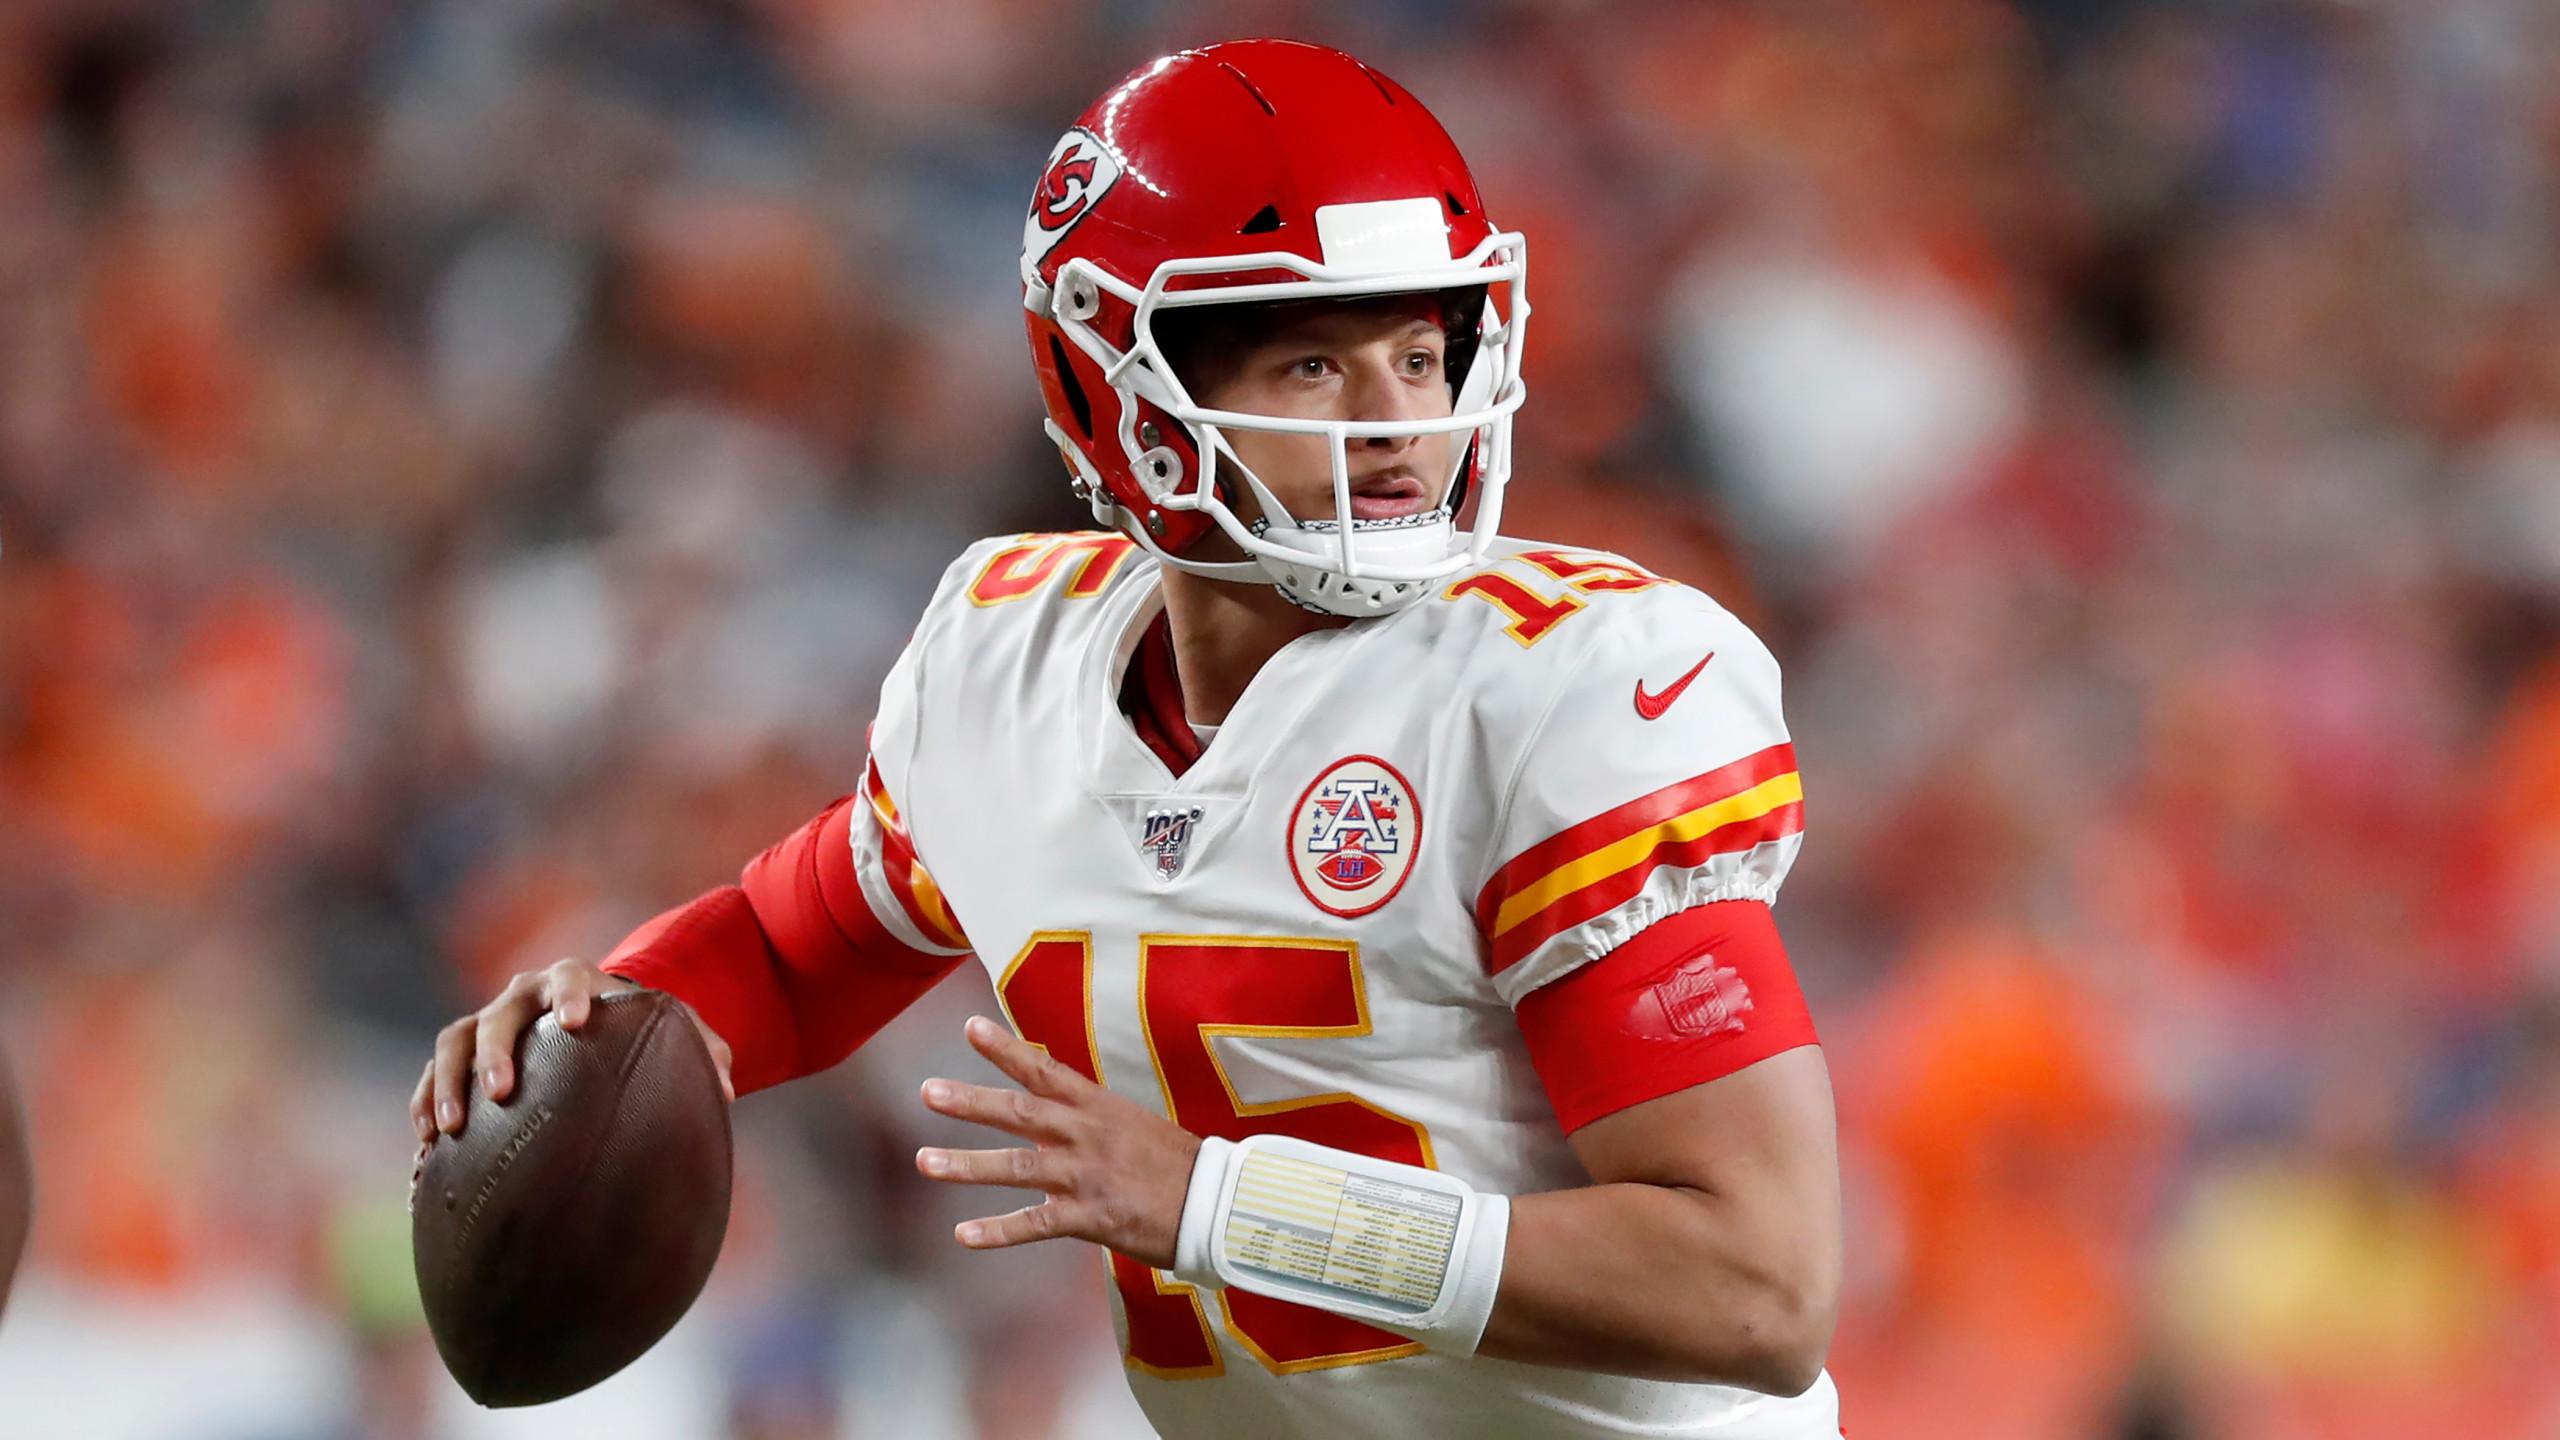 With contract extension ahead, Chiefs' owner hopes to keep